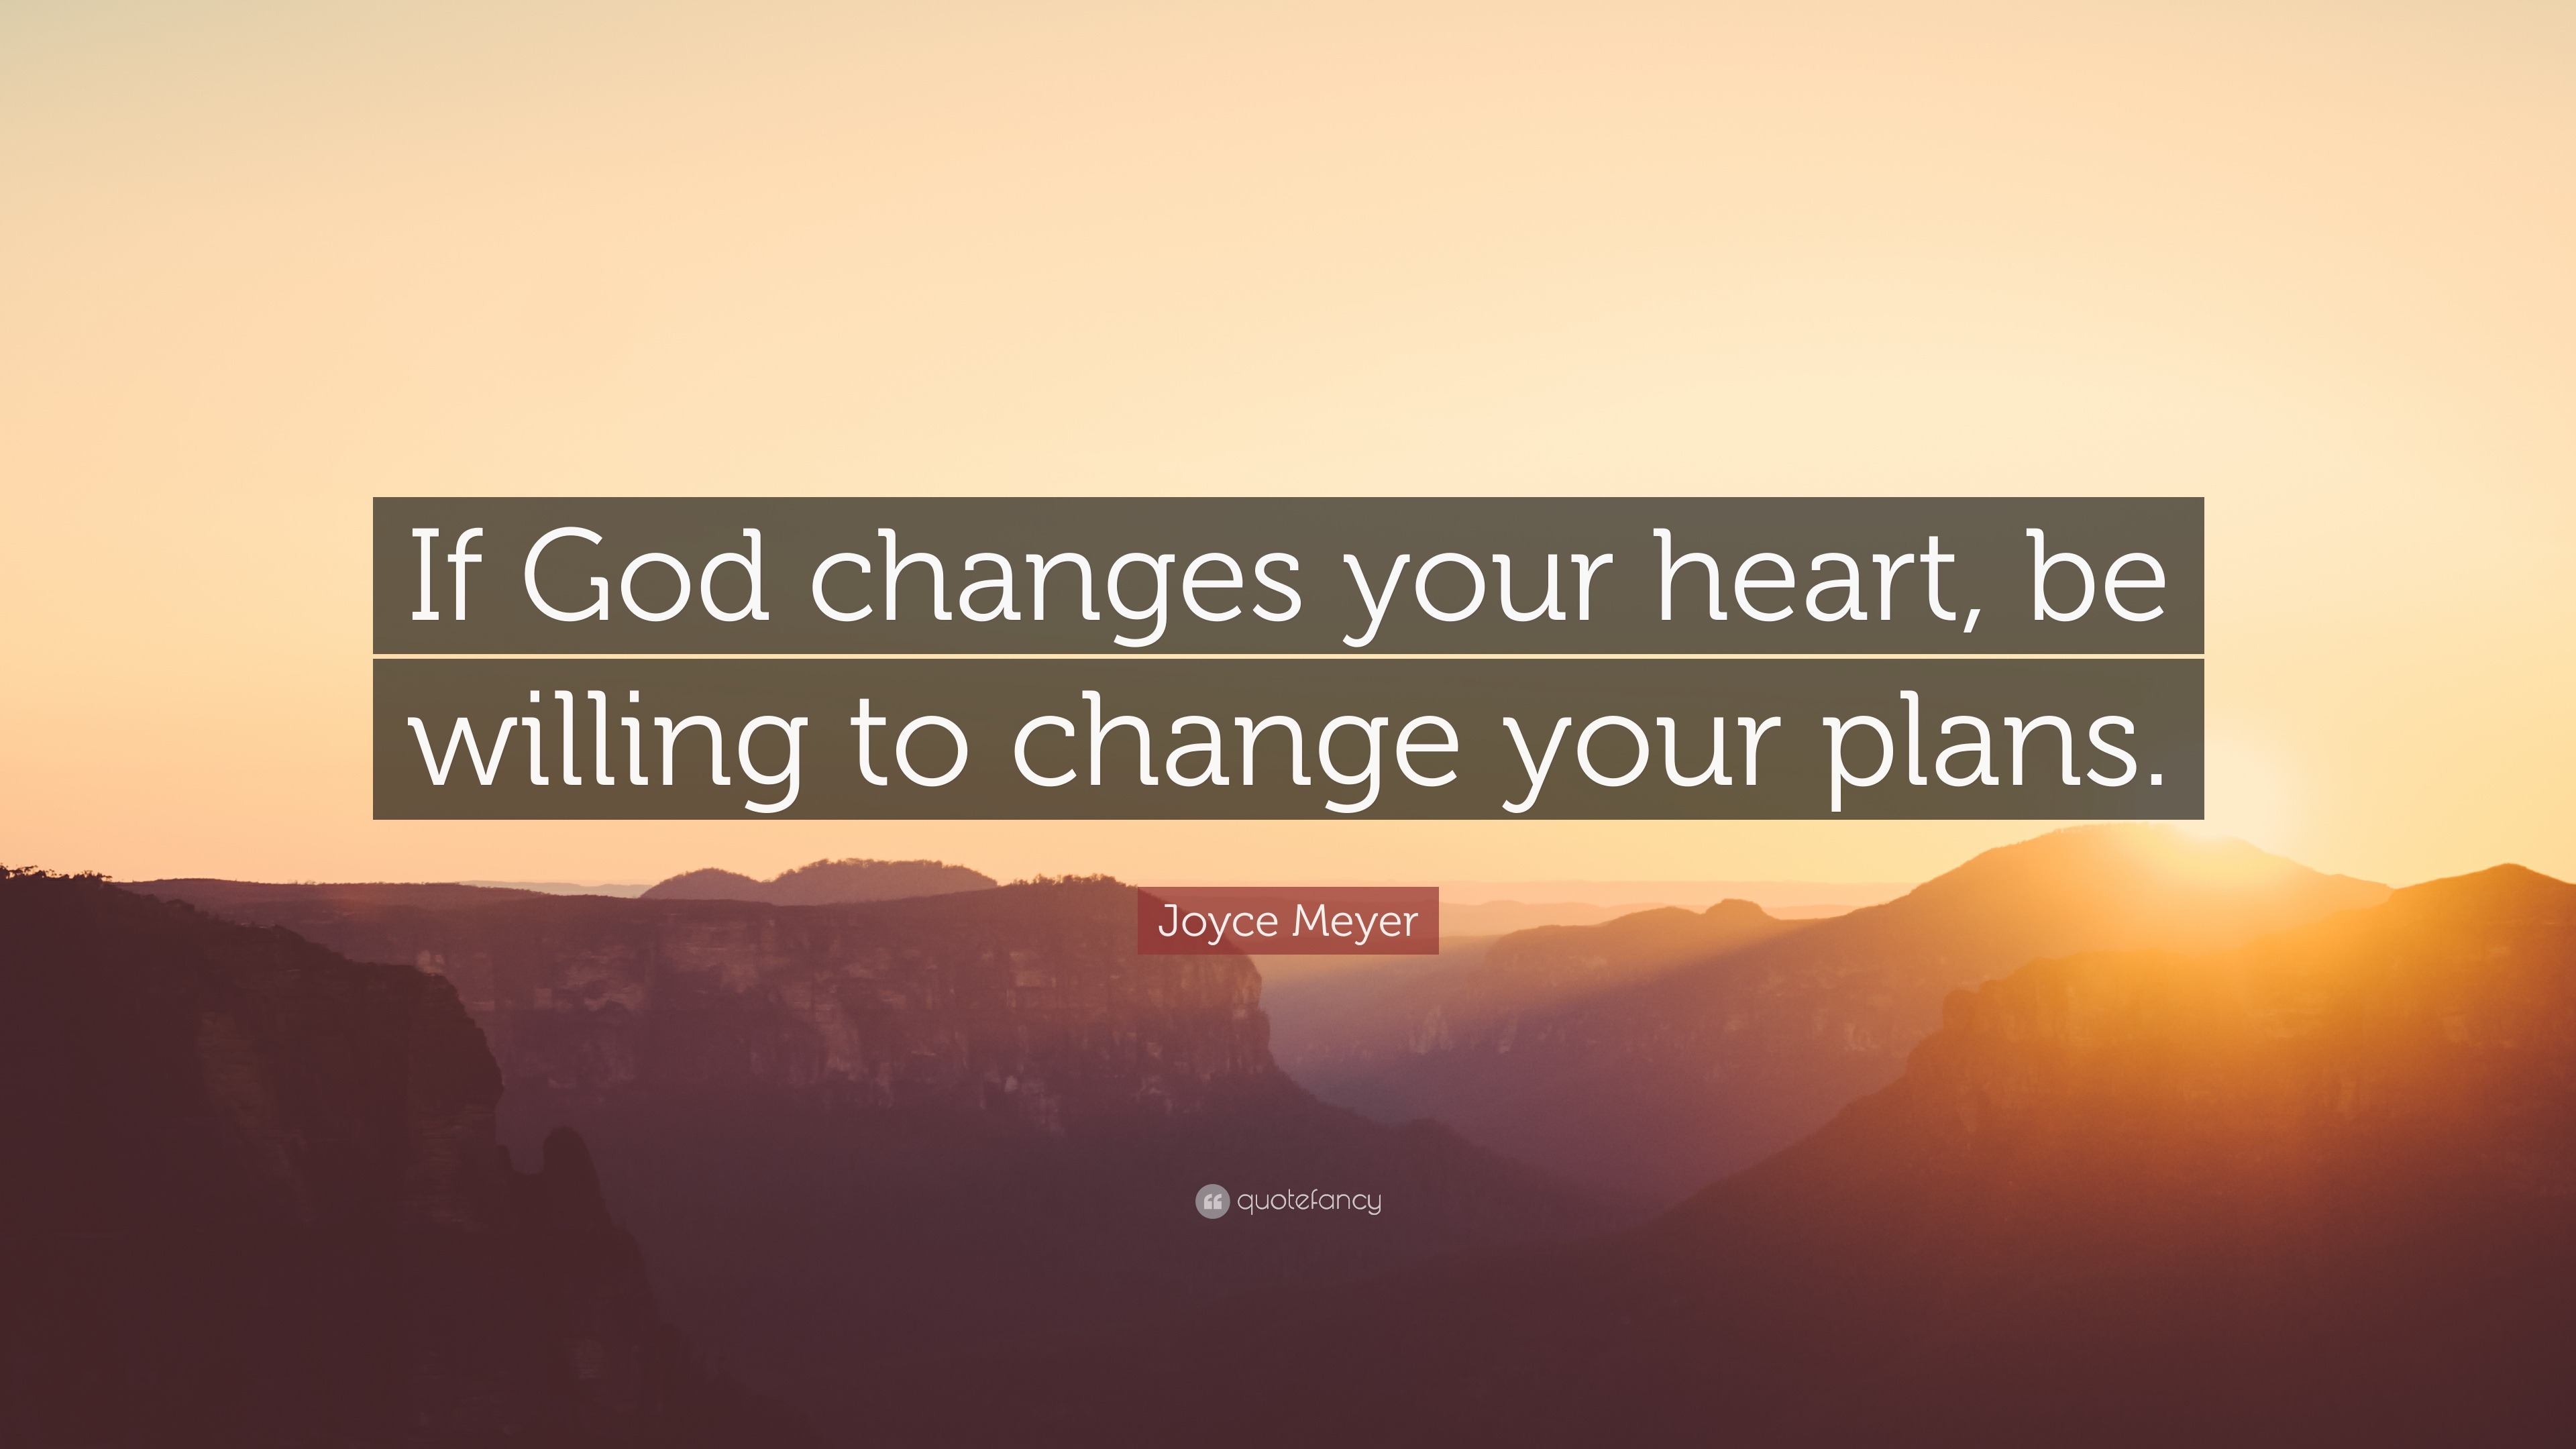 quotes about god changing your life Famous quotes about god changing your life Popular quotes about god changing your life